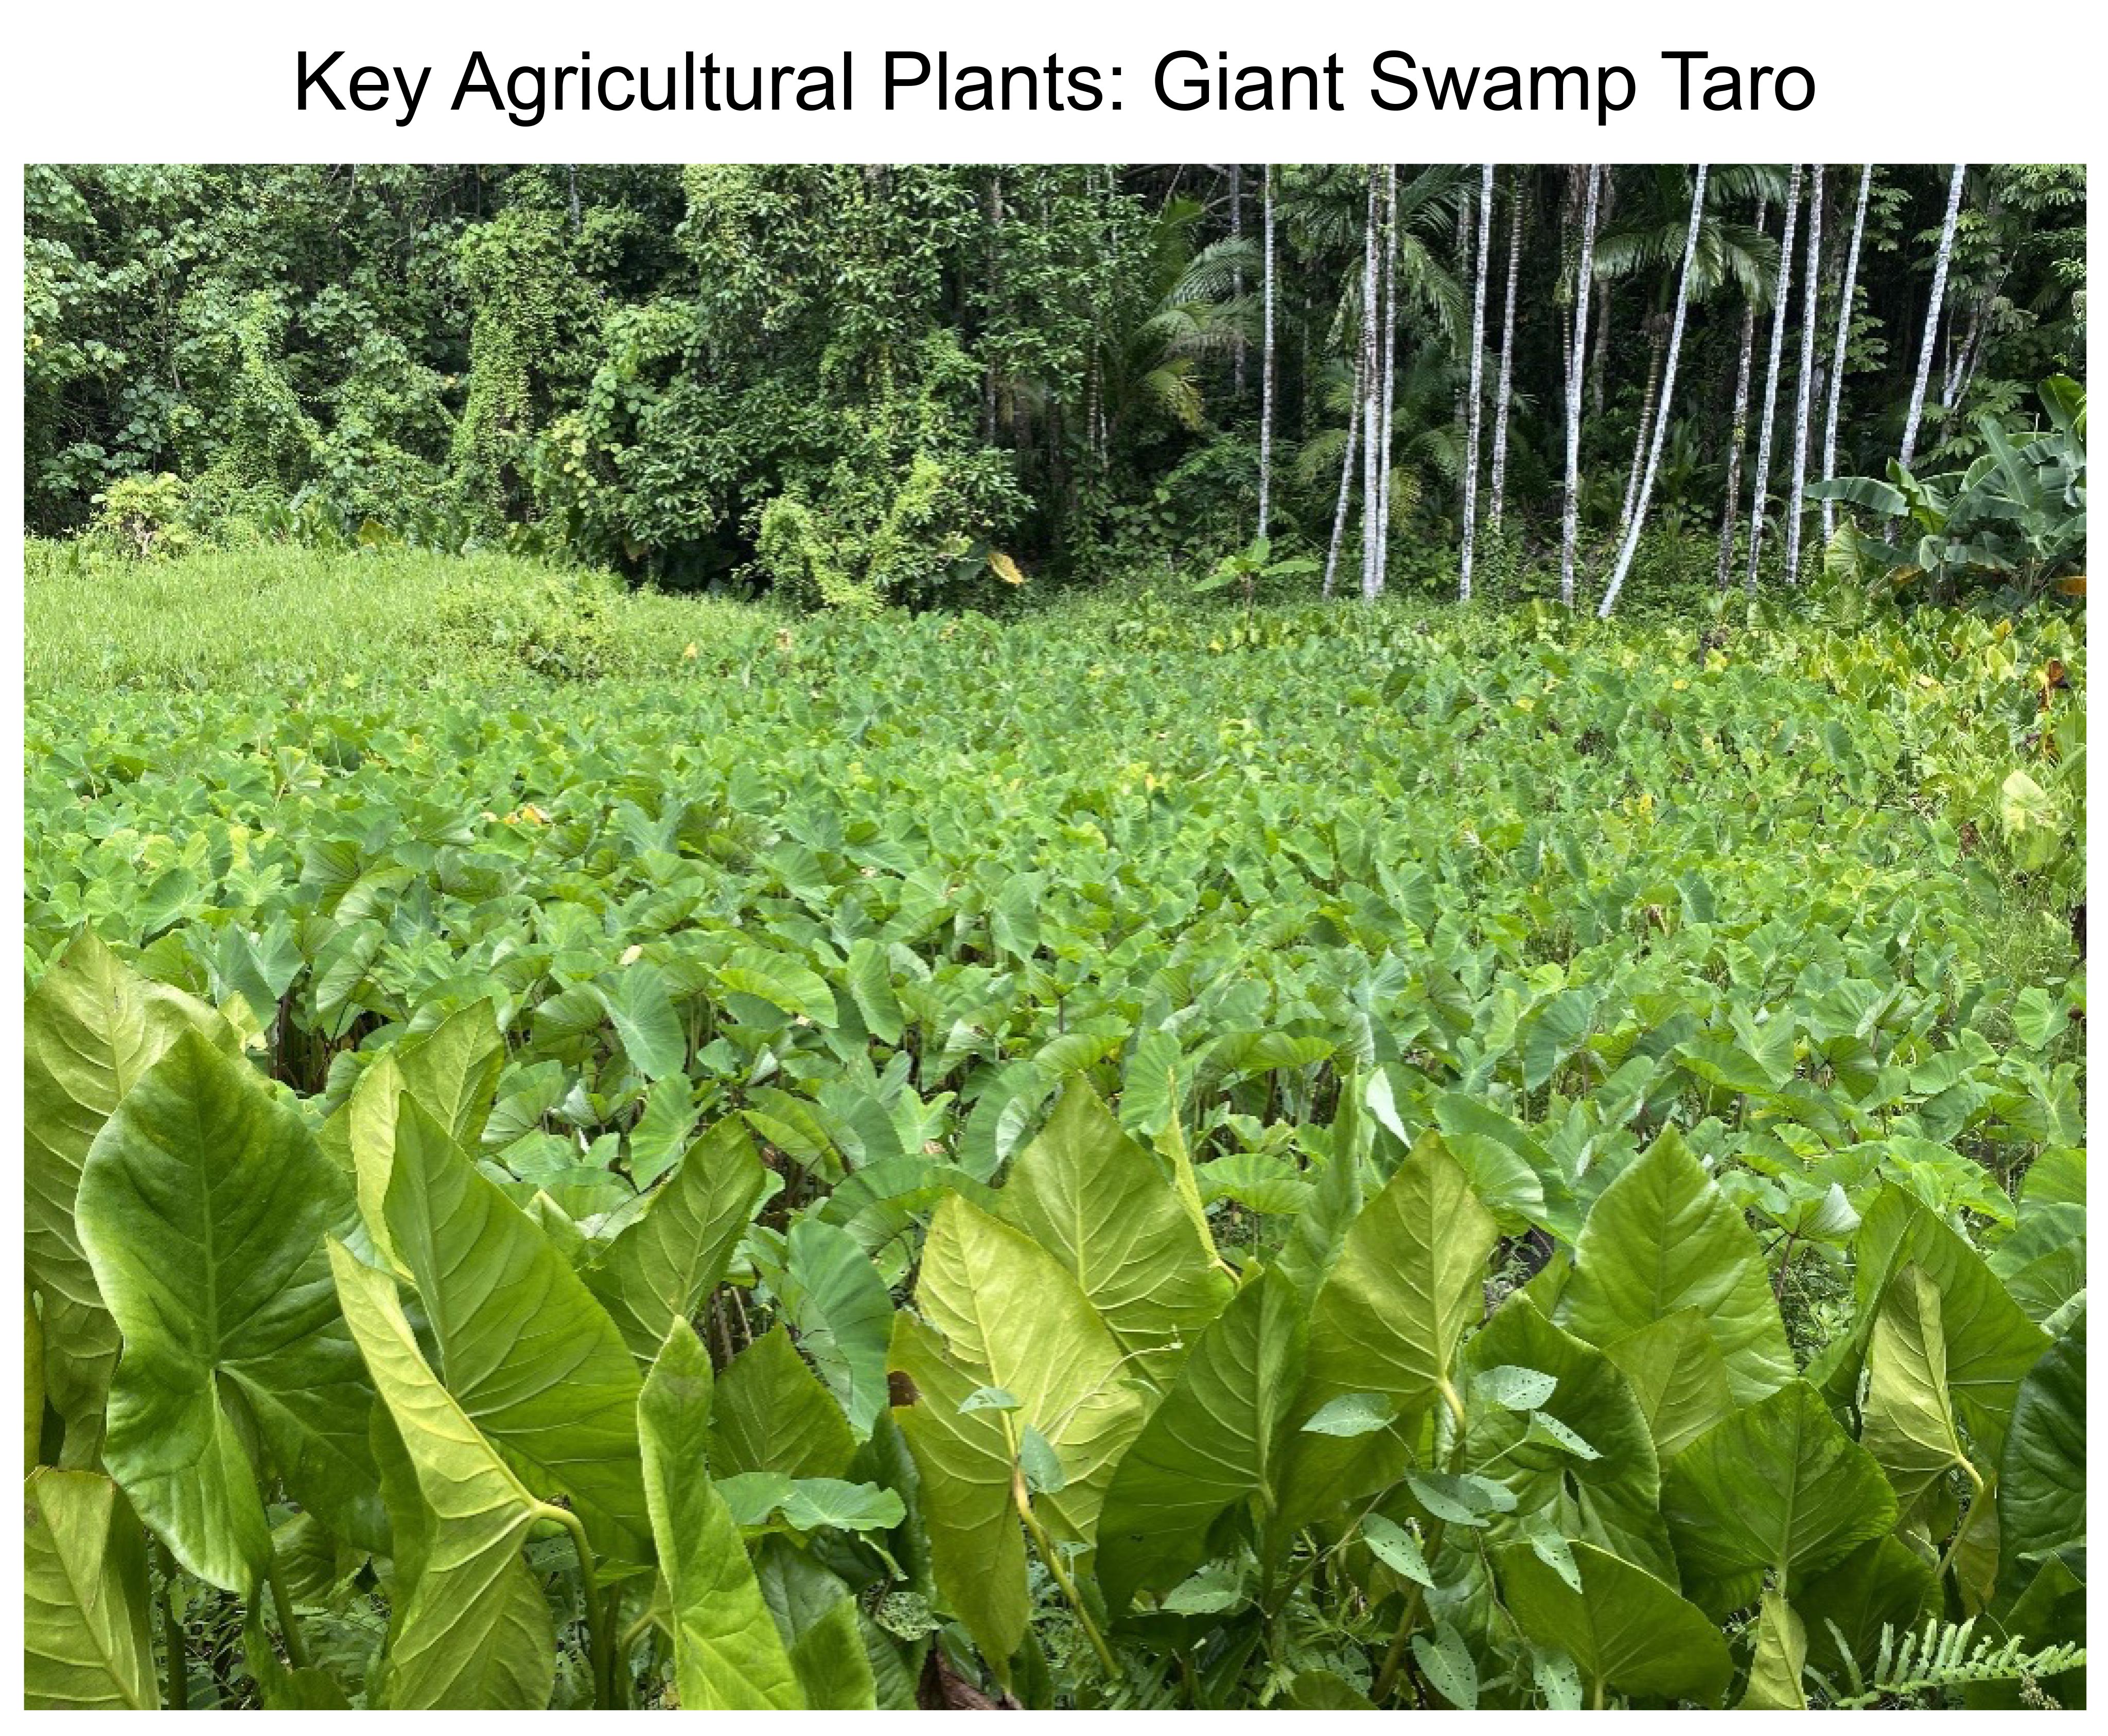 Key Agricultural Plants: Giant Swamp Taro